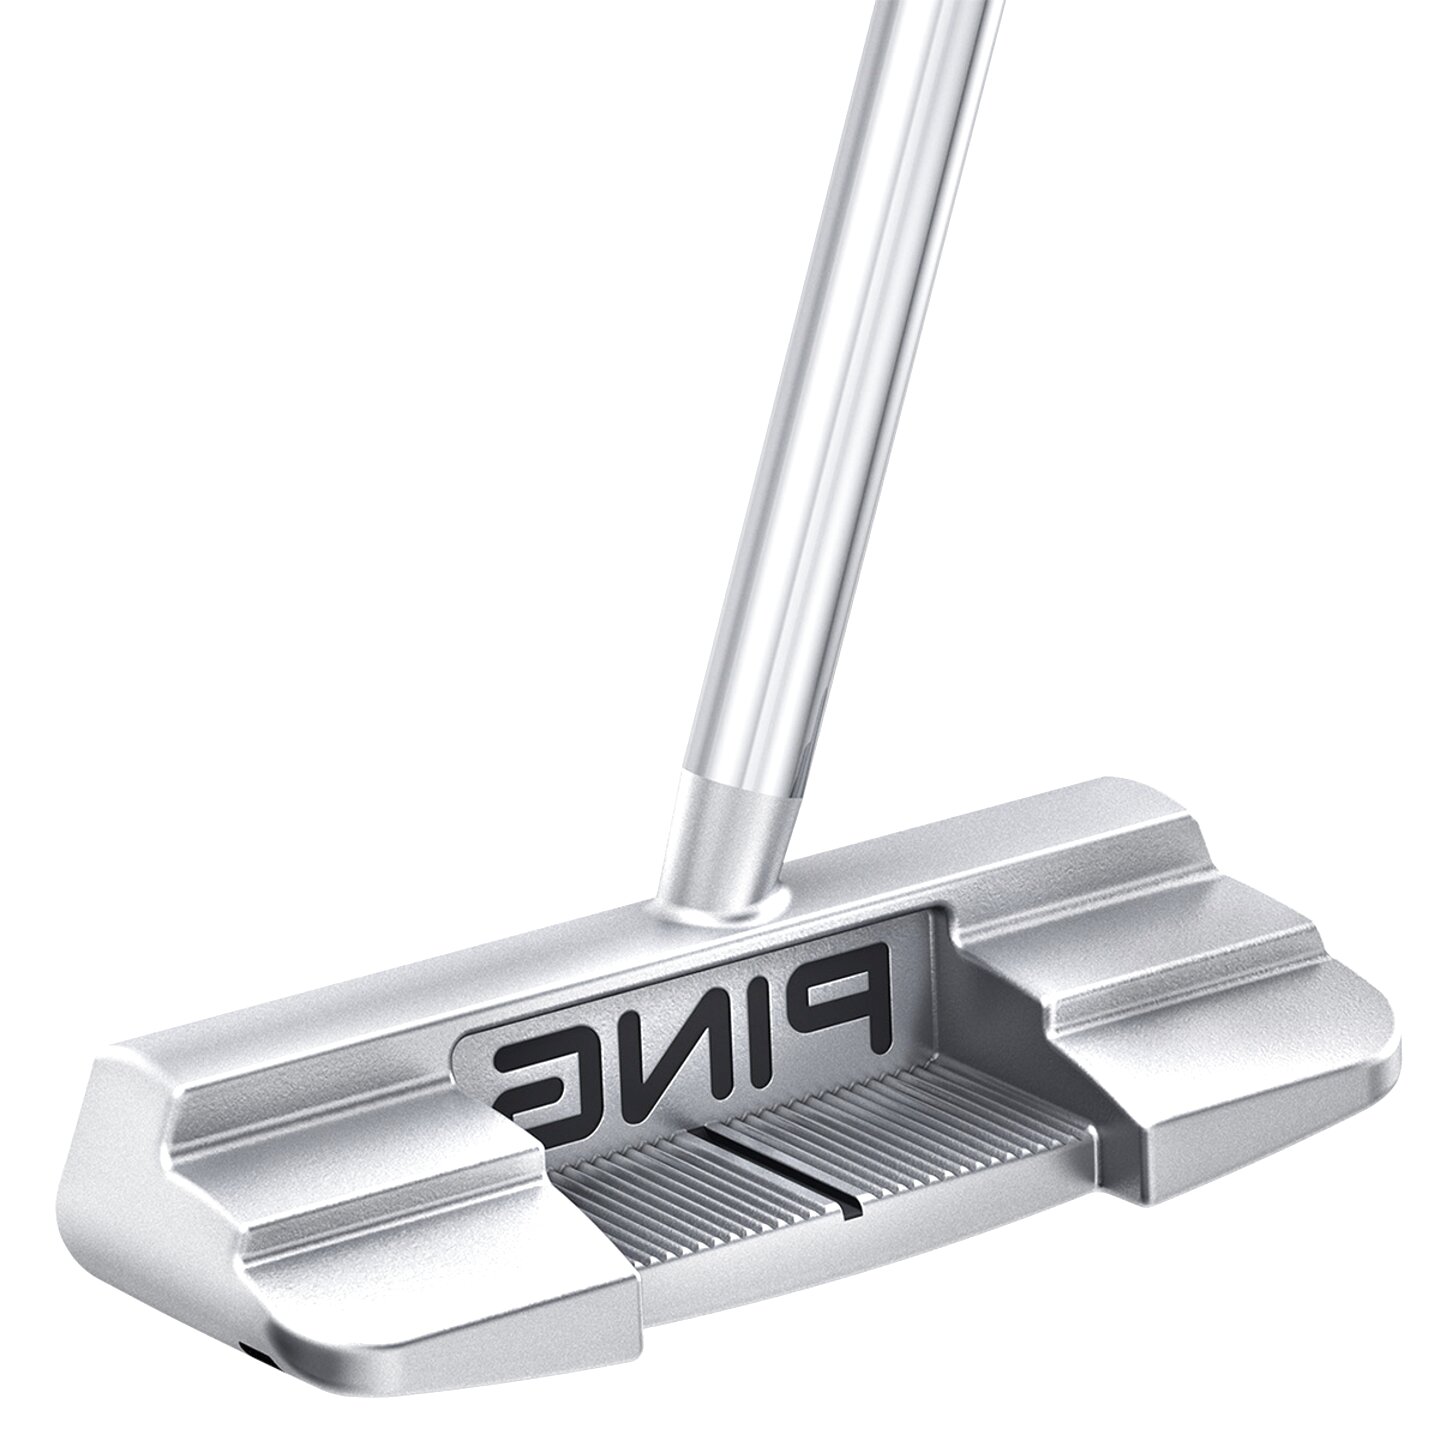 Centre Shafted Putter for sale in UK | 67 used Centre Shafted Putters